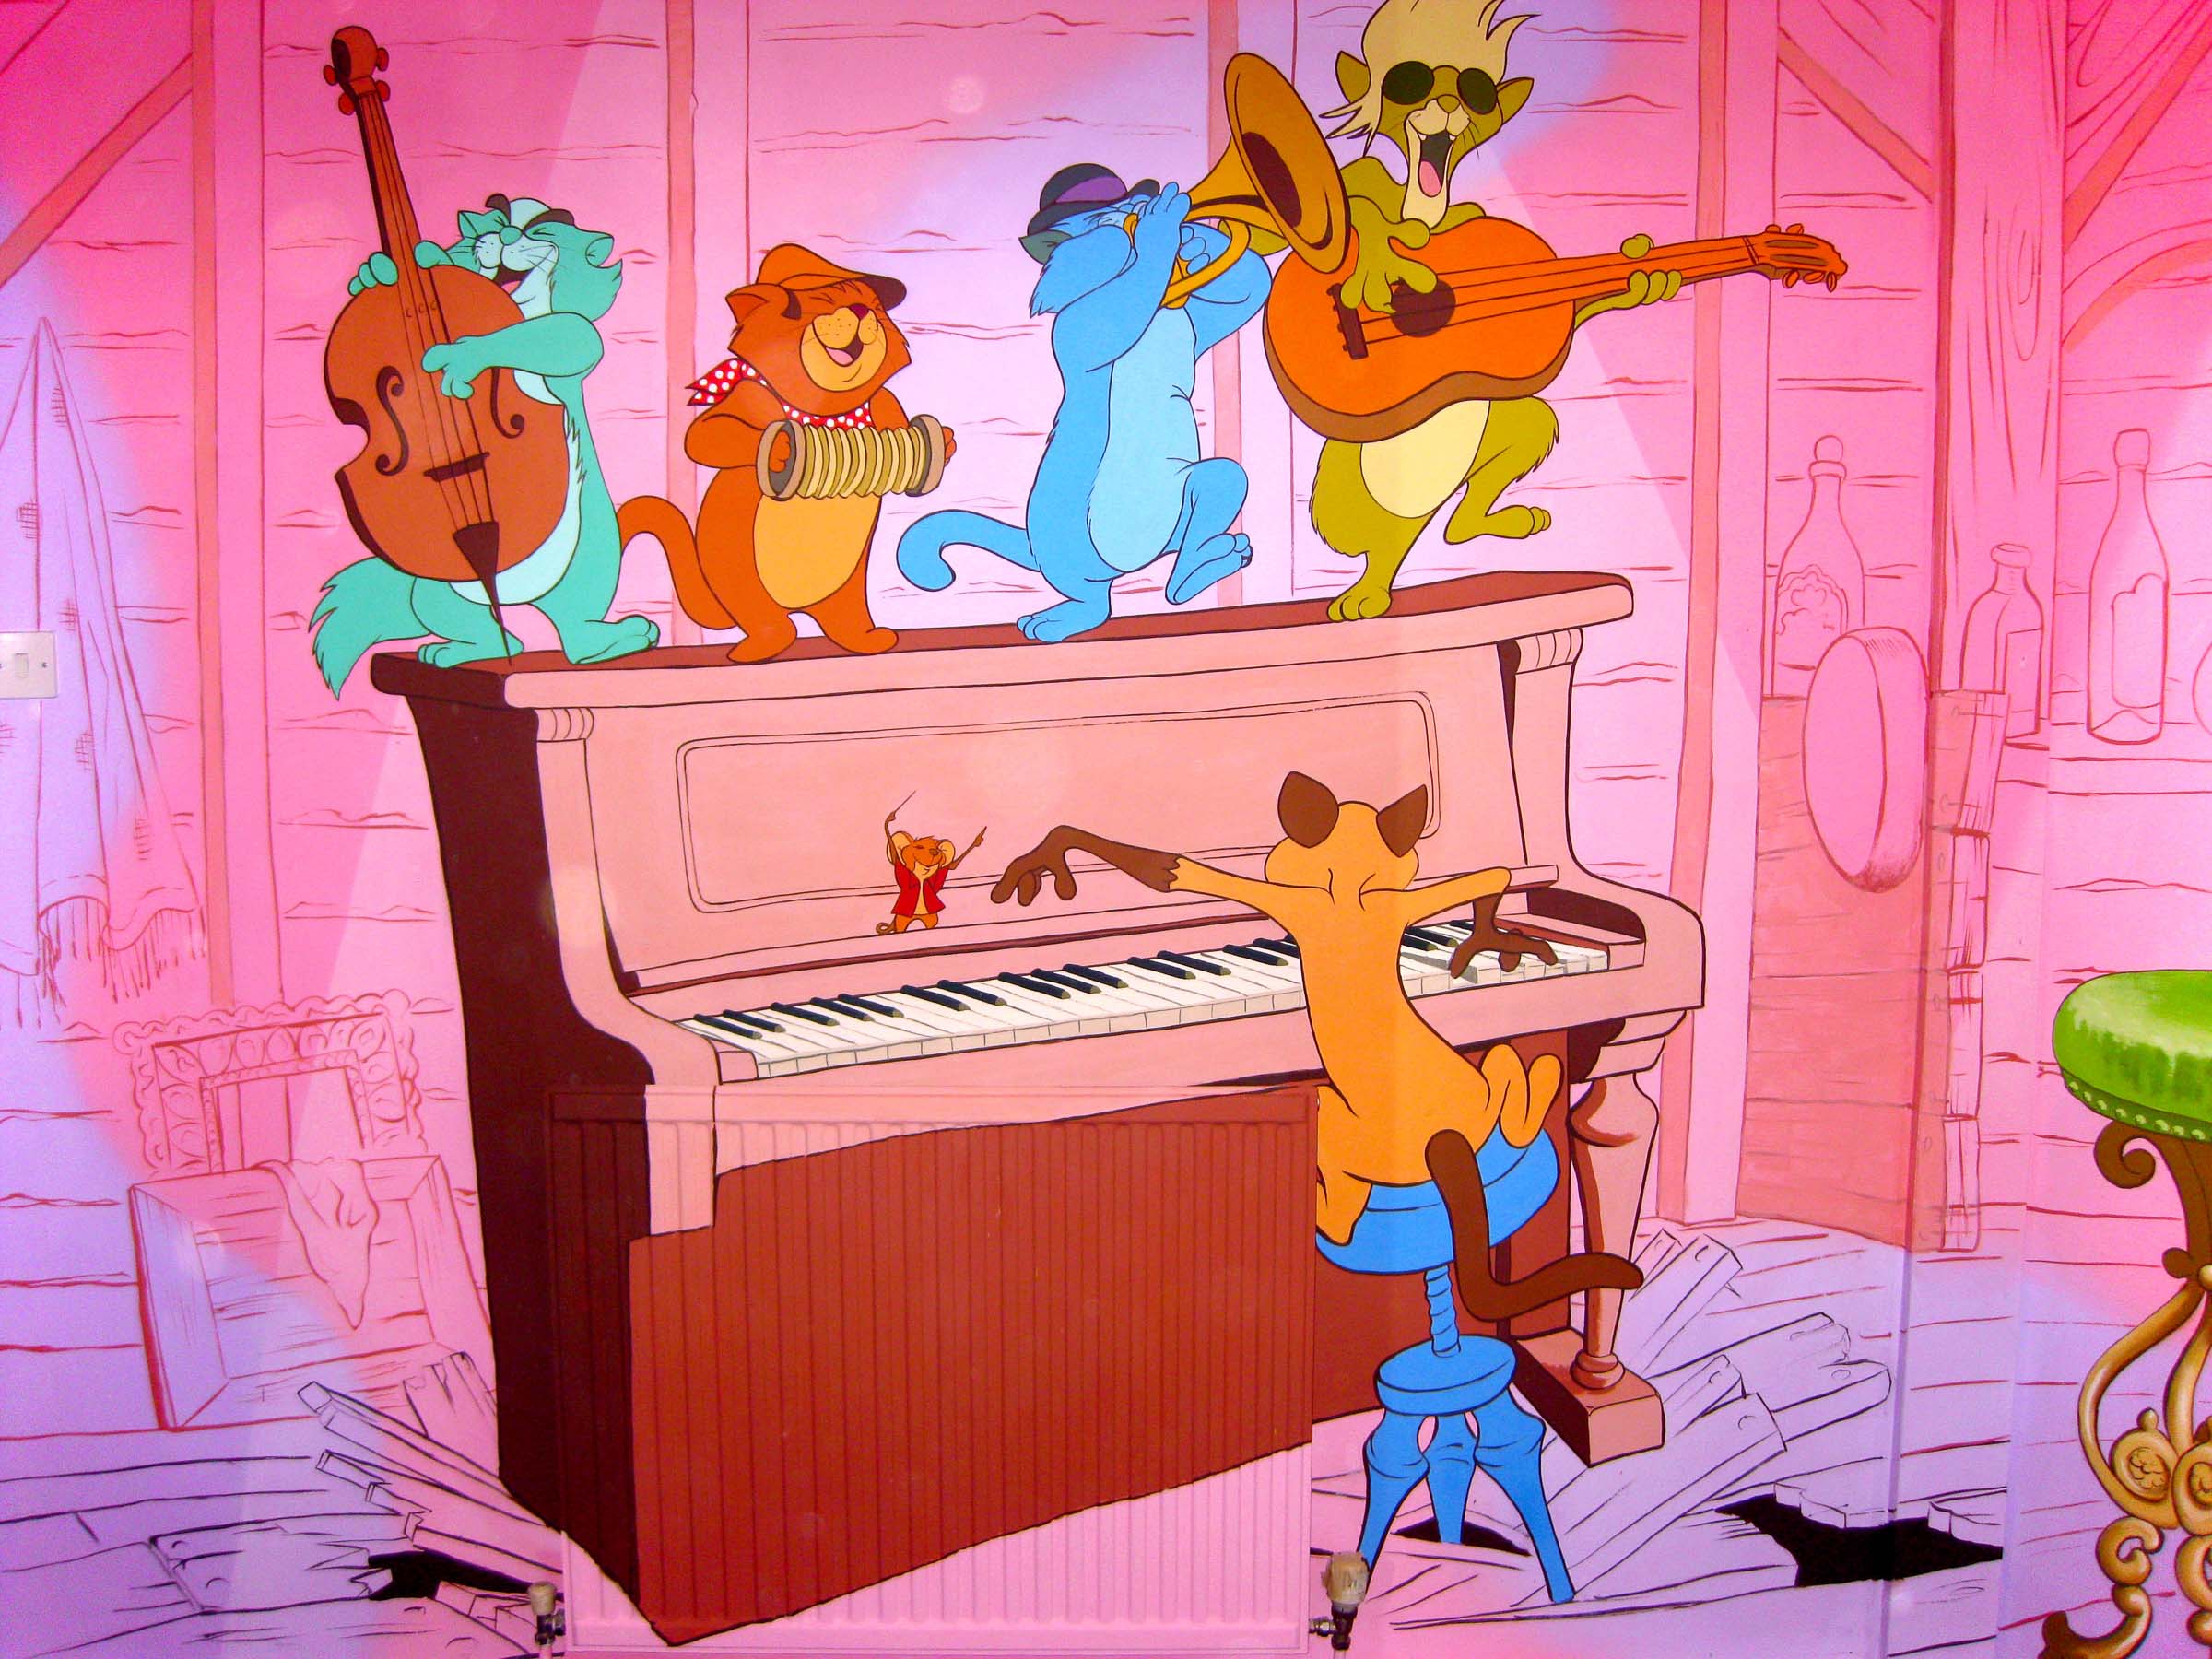 This part of the Aristocats mural disguises a radiator, and shows Scat Cat and his band, (Shun Gon, Hit Cat, Peppo and Billy bass) jazzing it up